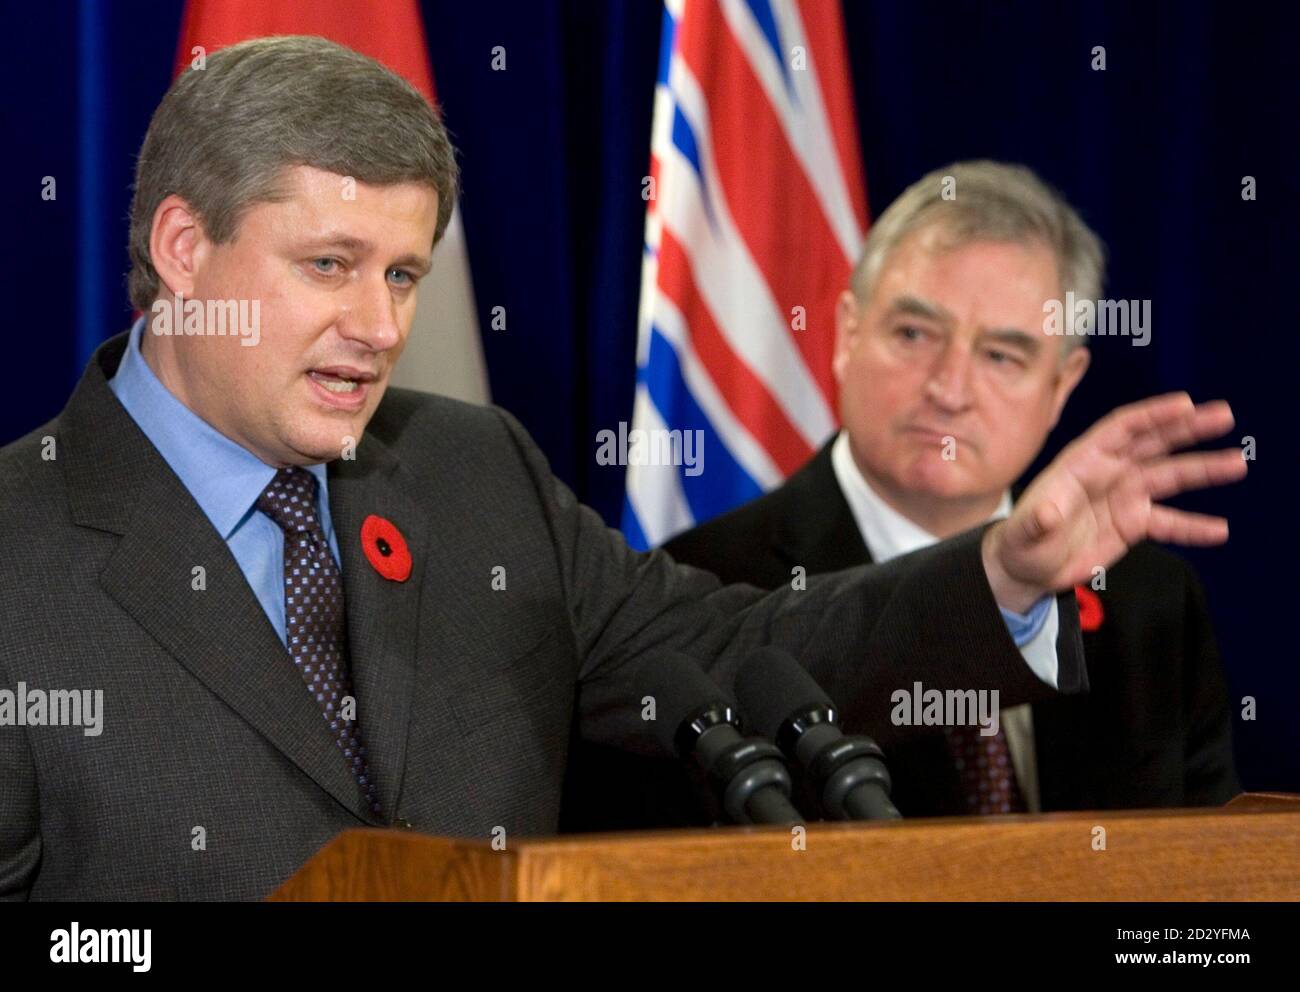 Canadian Prime Minister Stephen Harper (L) gestures as Trade Minister David Emerson looks on during a news conference in Vancouver, British Columbia November 7, 2007.       REUTERS/Andy Clark        (CANADA) Stock Photo